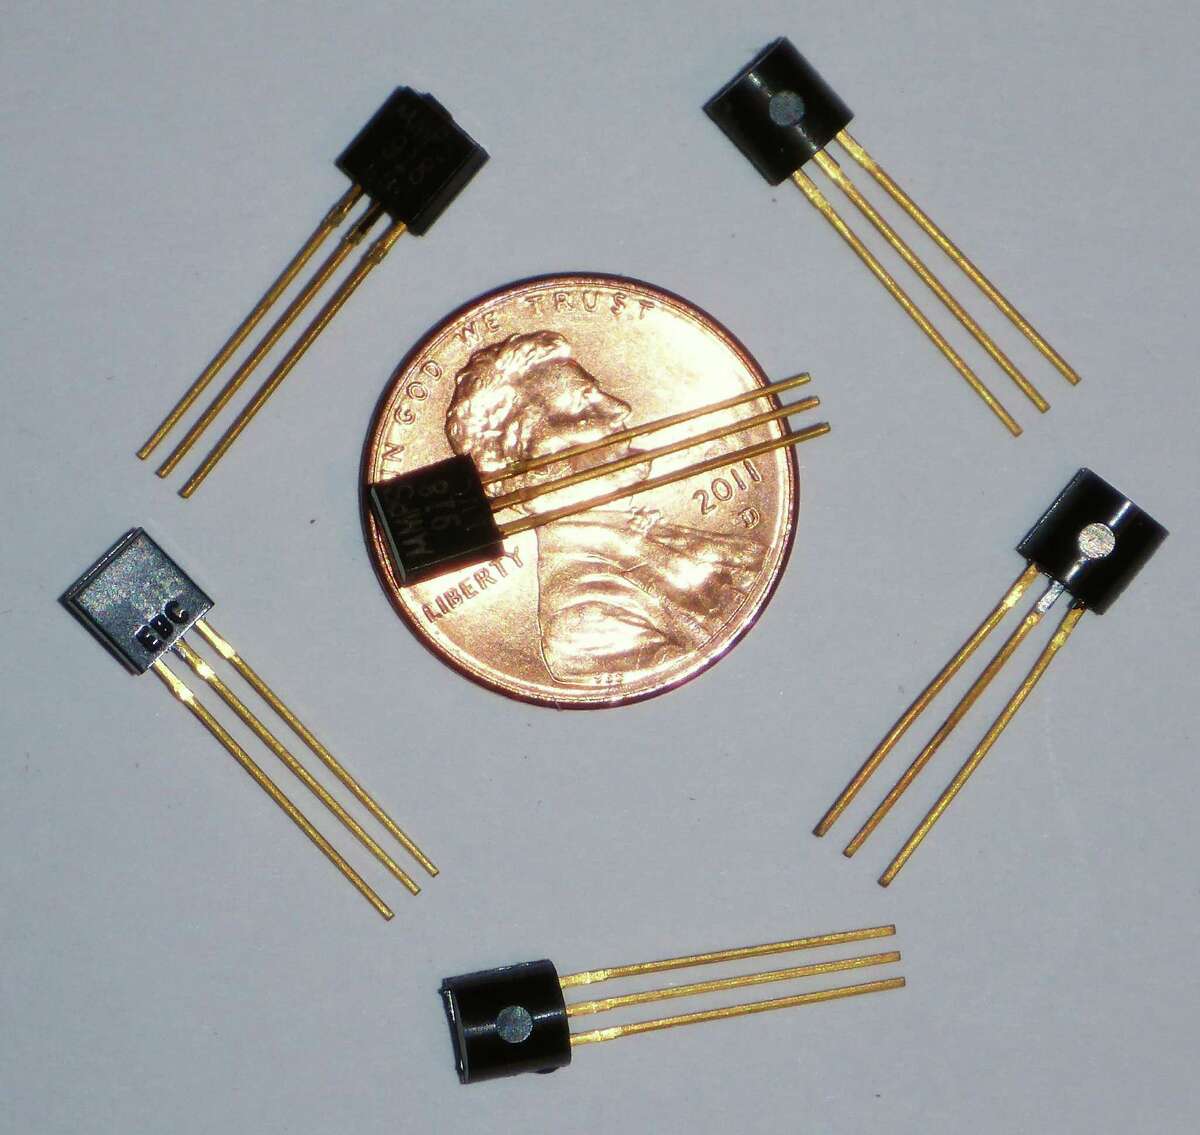 Sixty years ago the development of silicon transistors like these paved the way for the invention of integrated circuits.